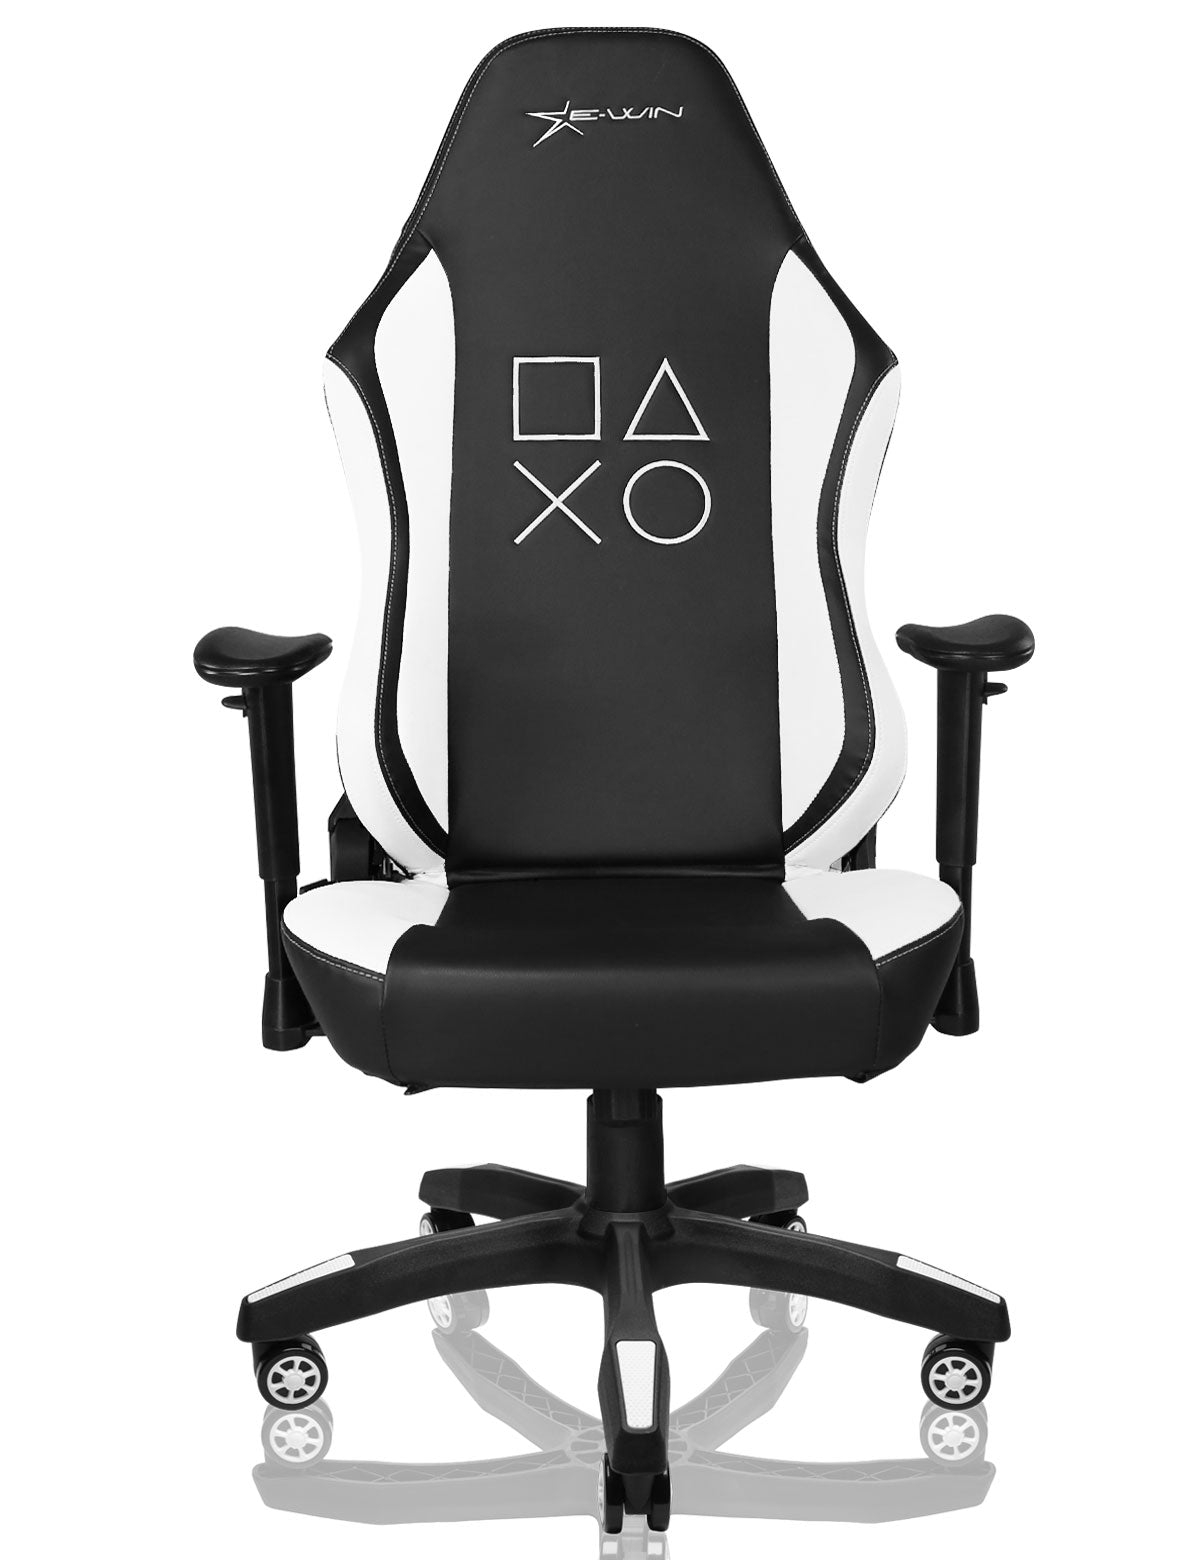 E-WIN Knight Series Ergonomic Computer Gaming Office Chair with Pillows - KTE KT-BW2E-400